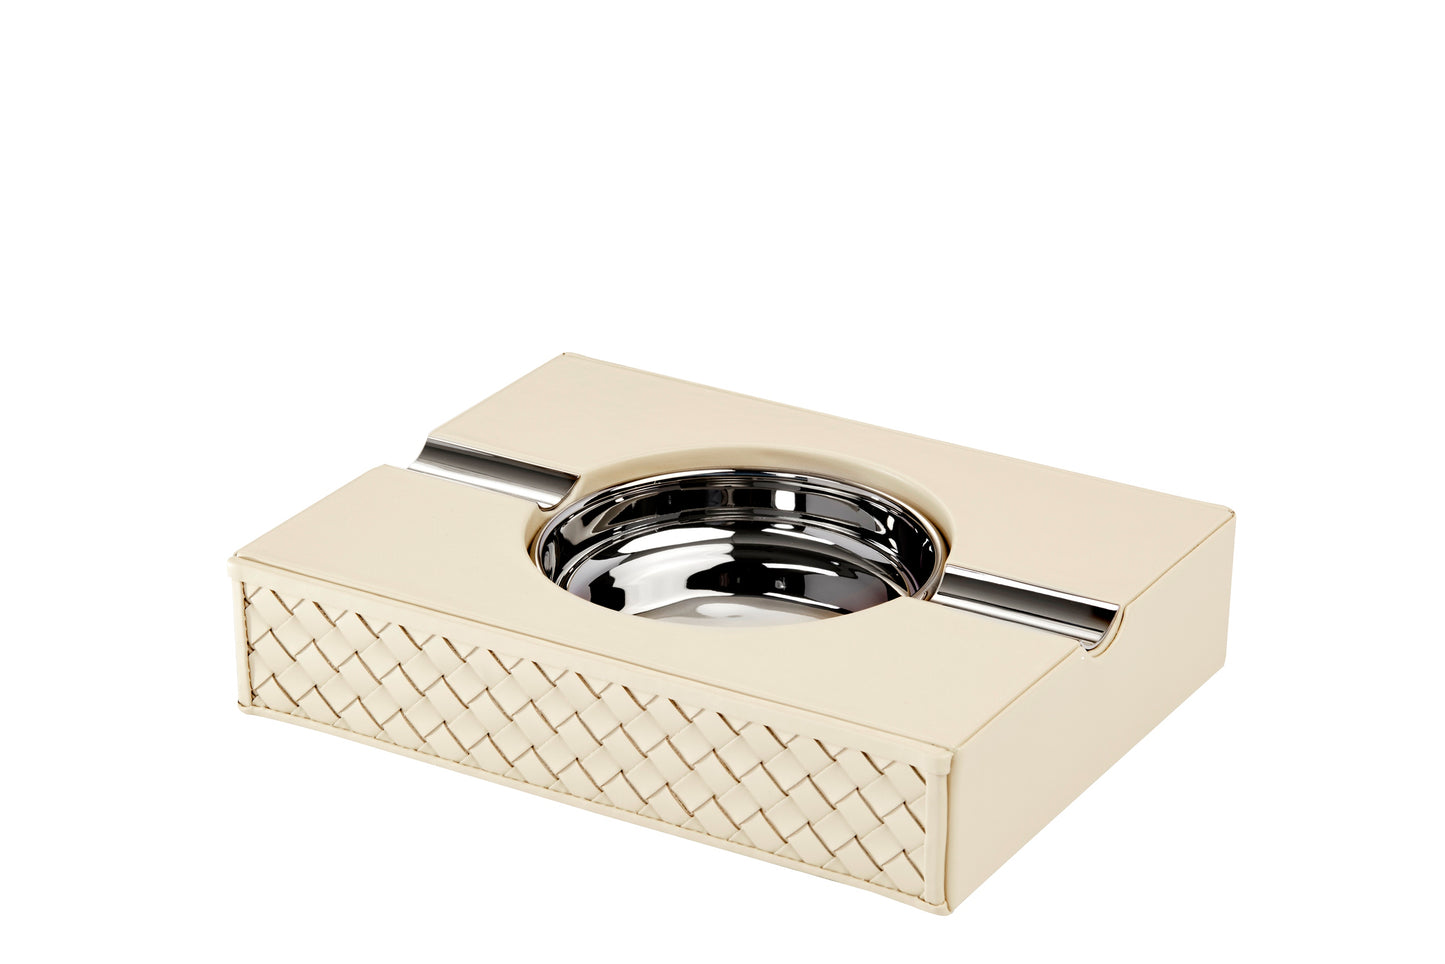 Zeno Handwoven Leather-Covered Cigar Ashtray | Elegant Design with Handwoven Leather Cover | Perfect for Enjoying Cigars in Style | Explore a Range of Luxury Cigar Accessories at 2Jour Concierge, #1 luxury high-end gift & lifestyle shop